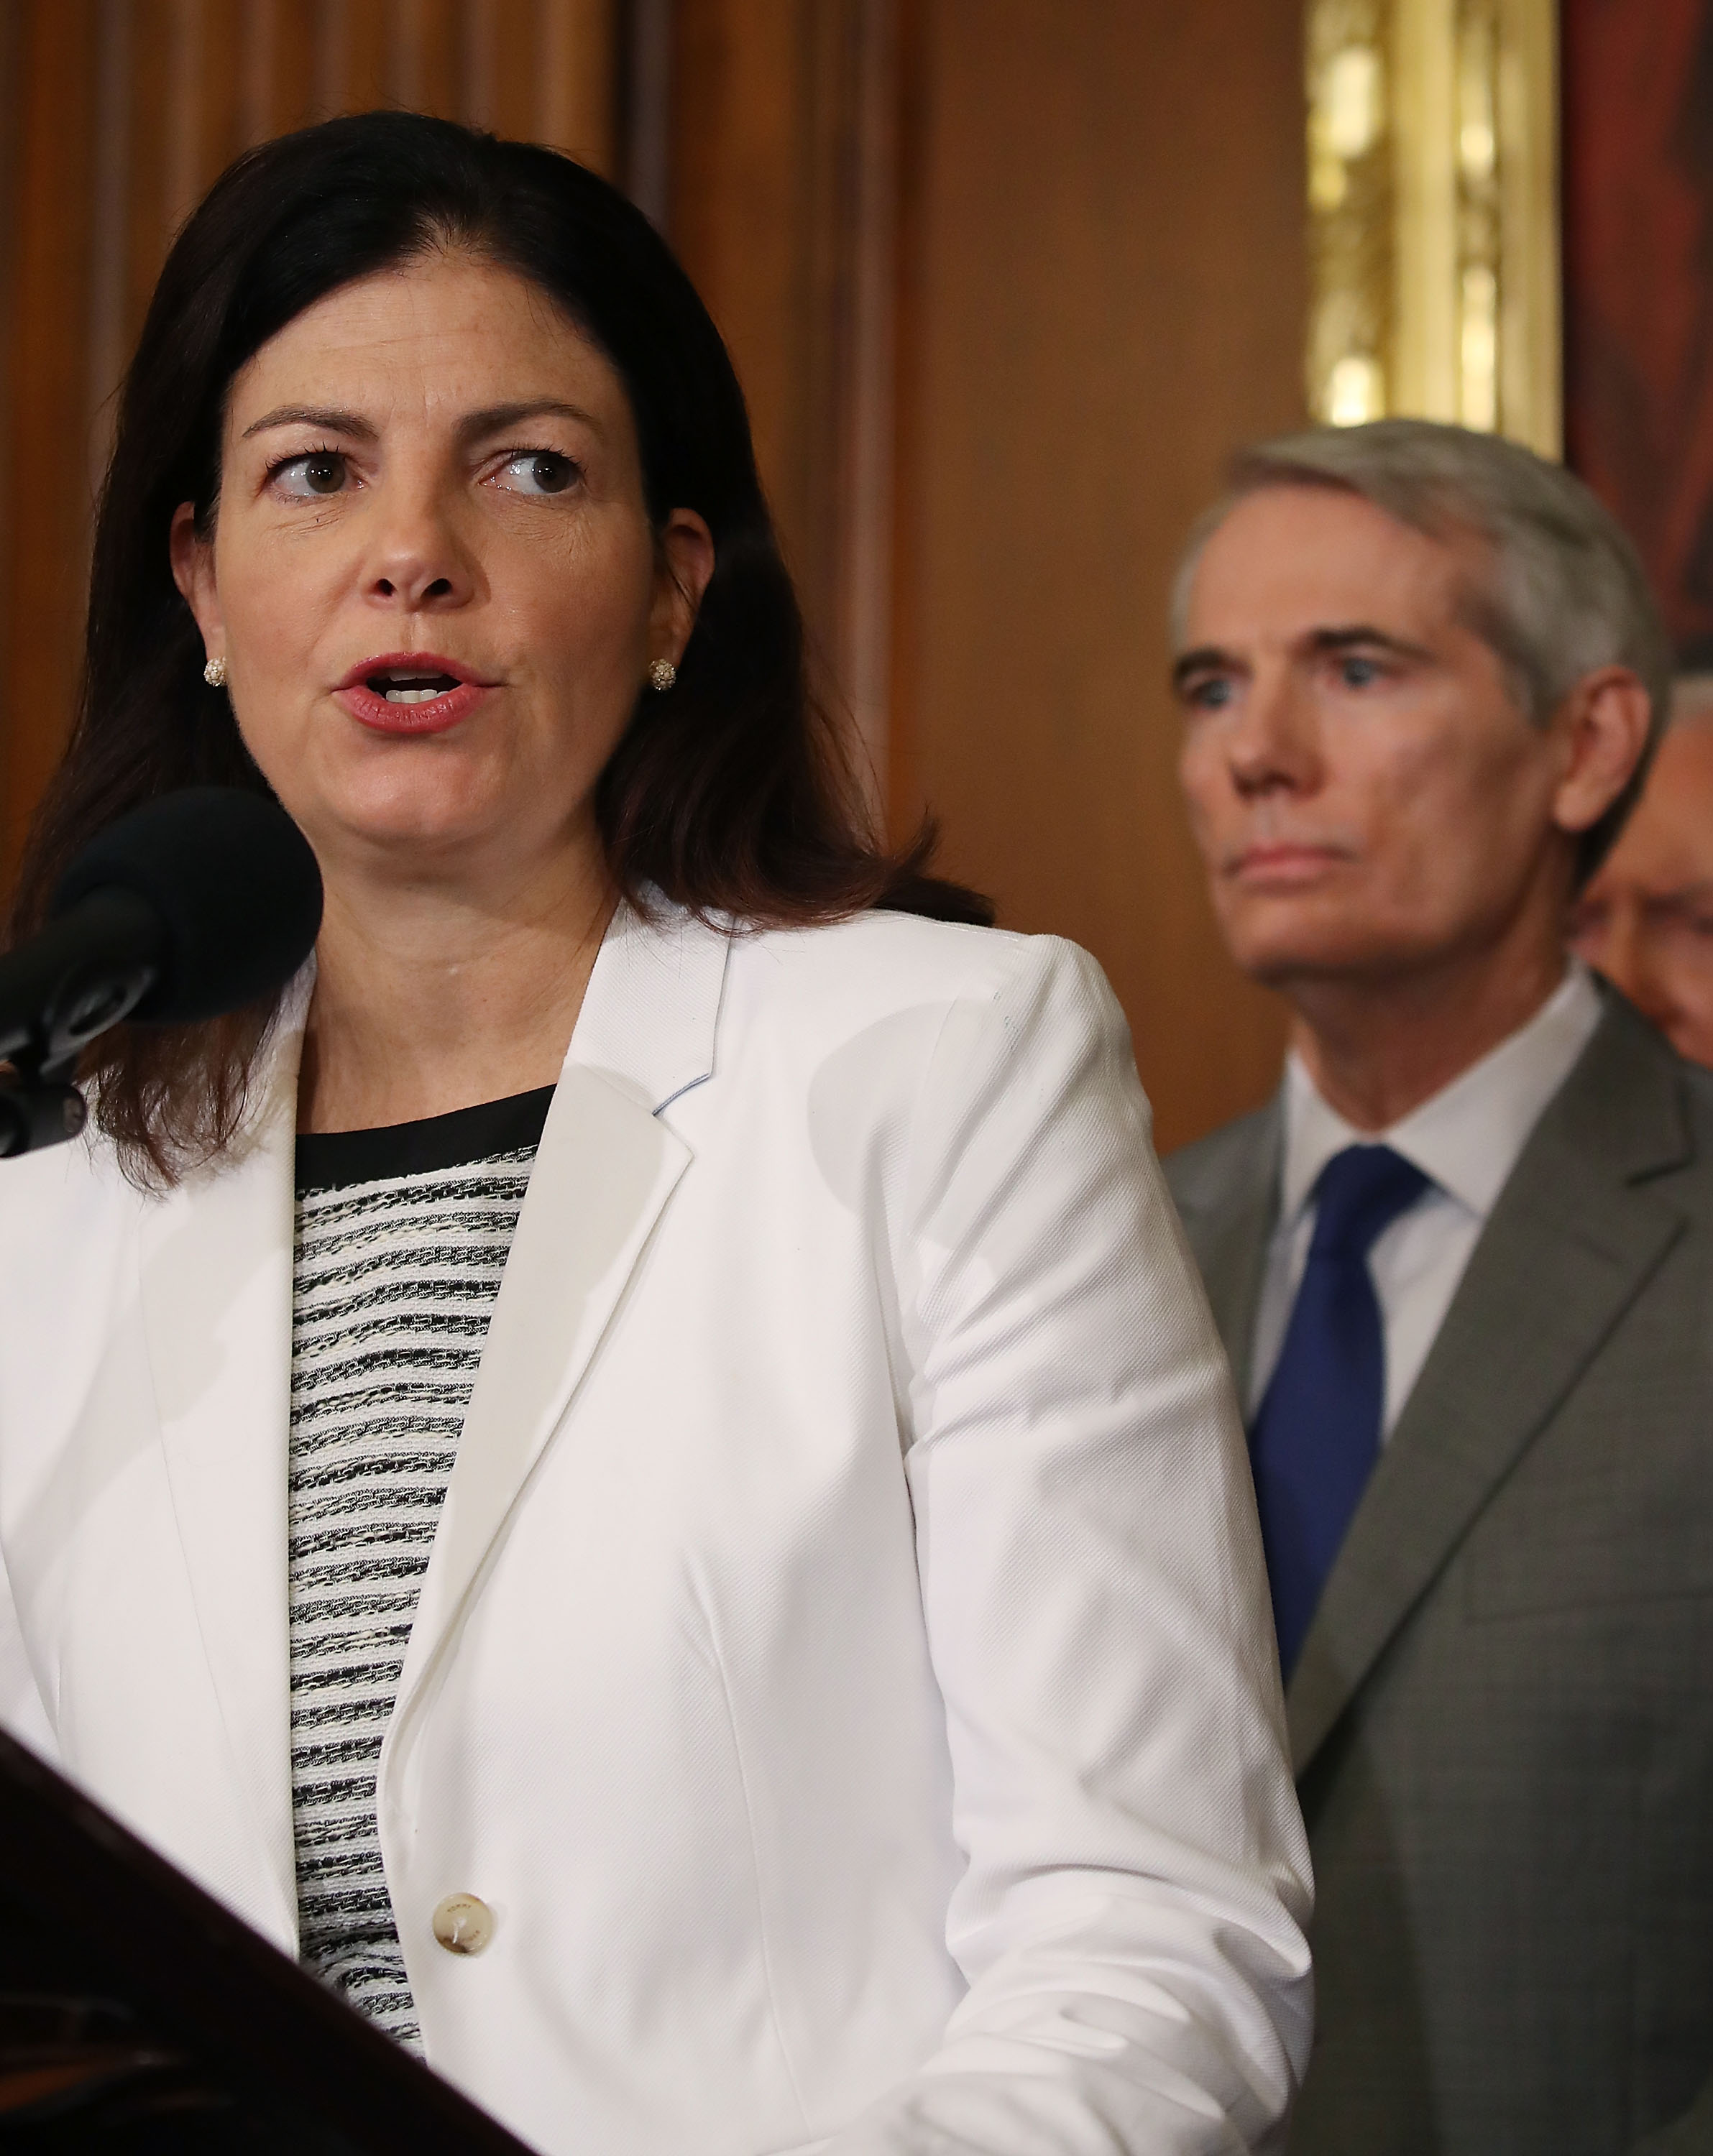 Sen. Kelly Ayotte (R-NH) speaks while flanked by Sen. Rob Portman (R-OH).